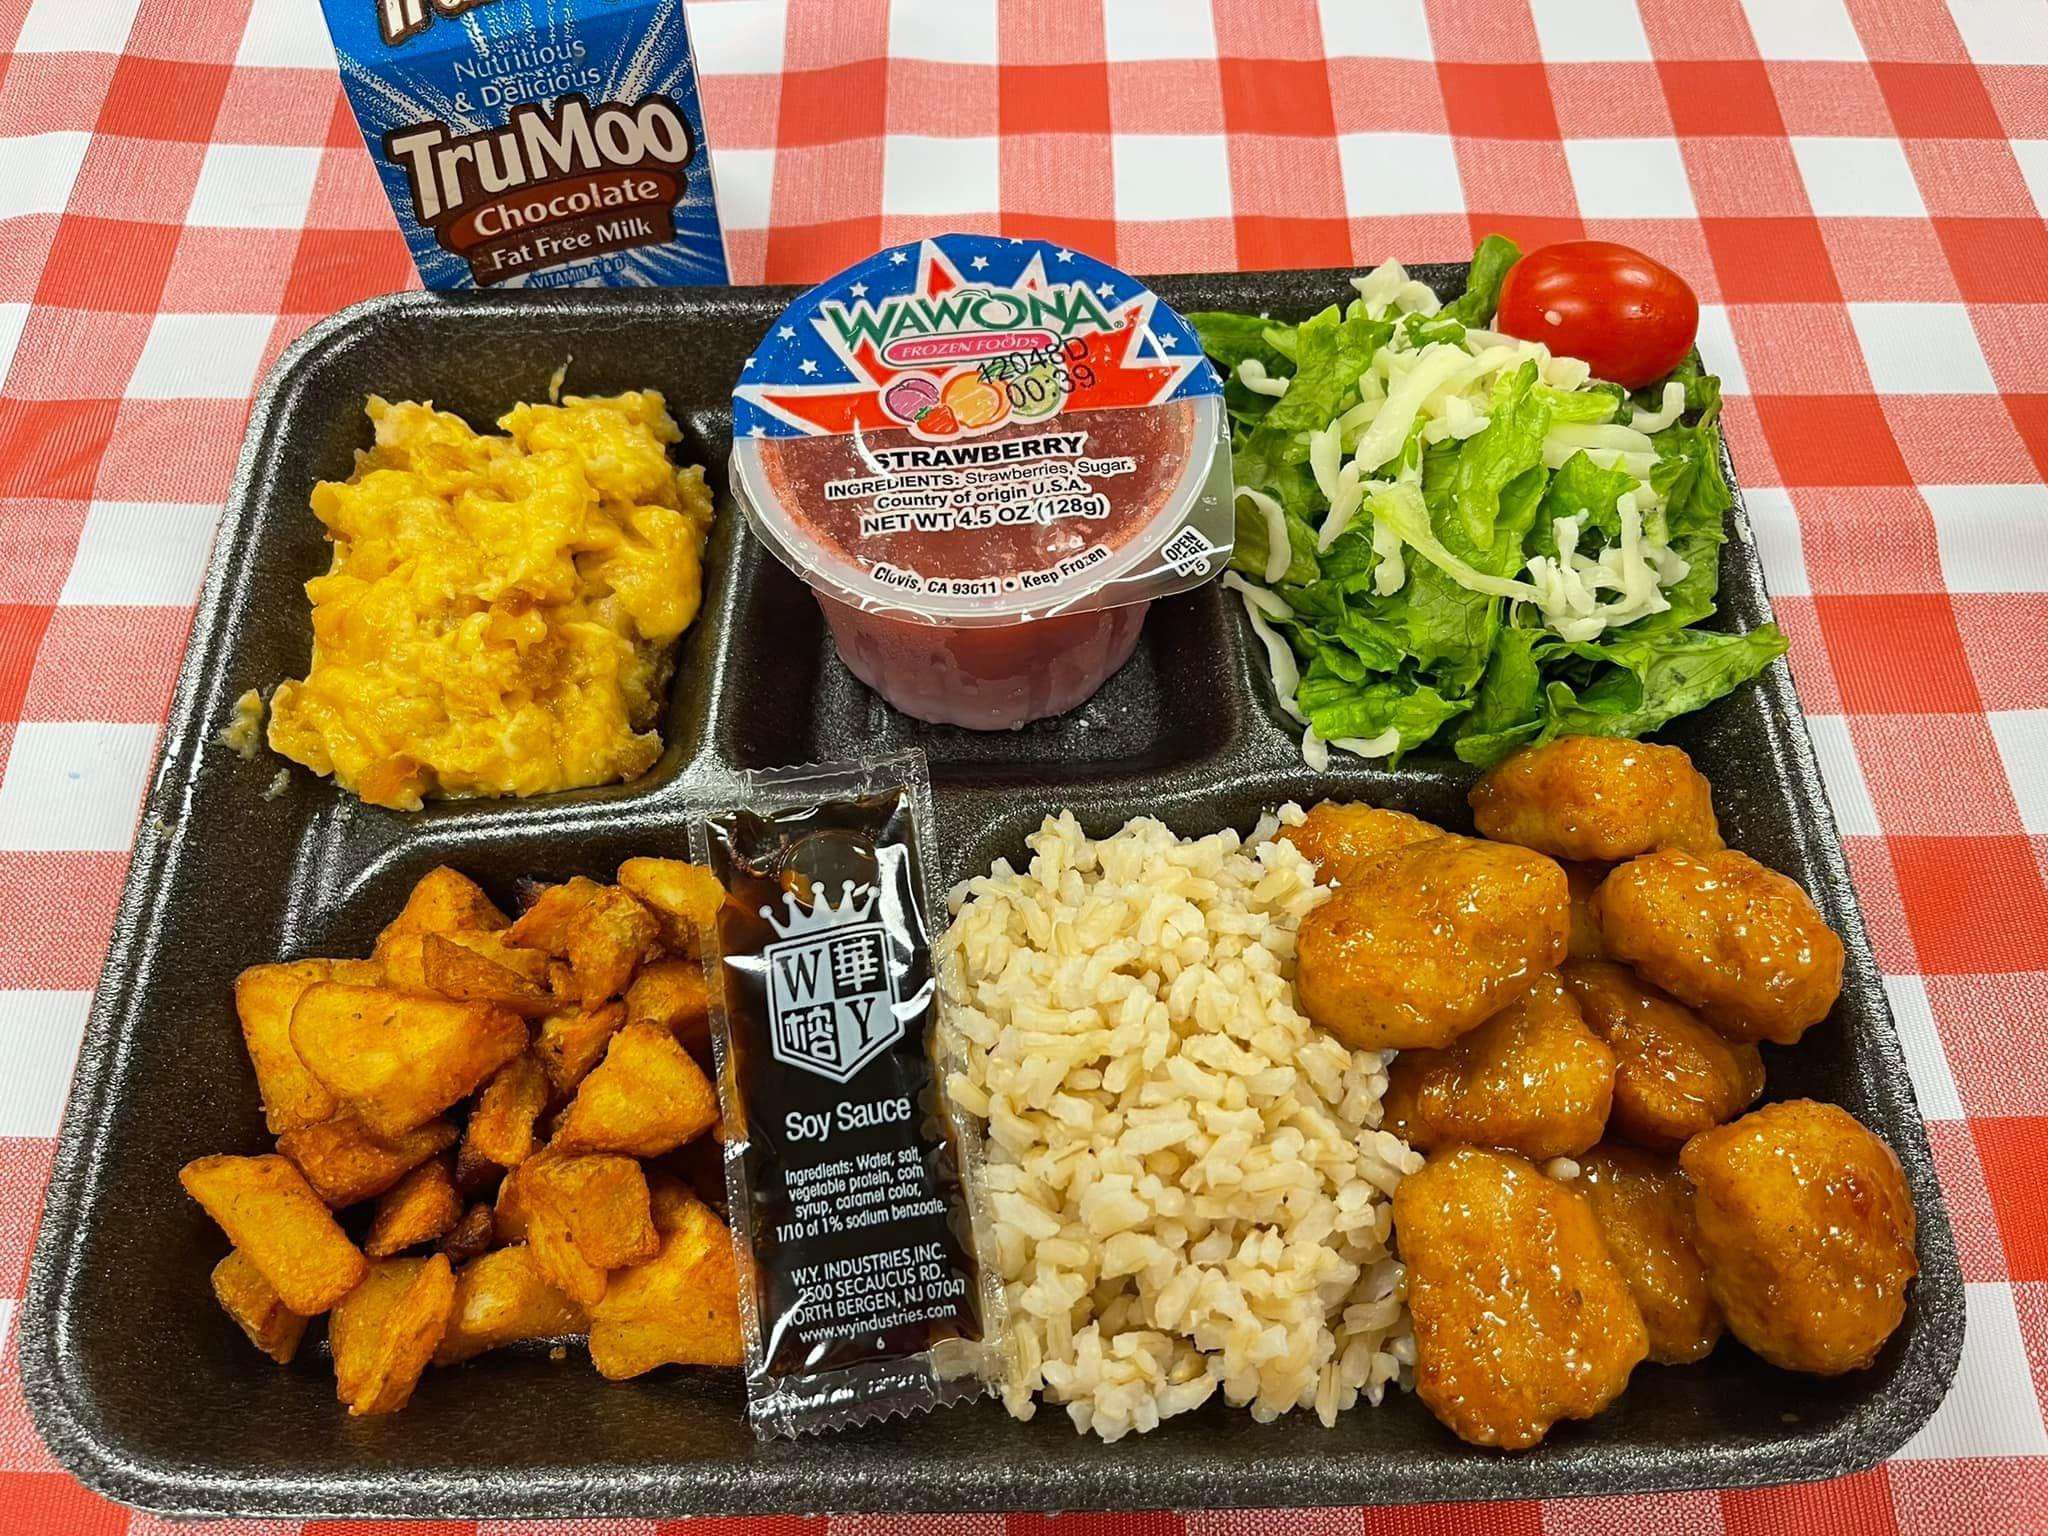 image showing $3 School lunch: North Georgia